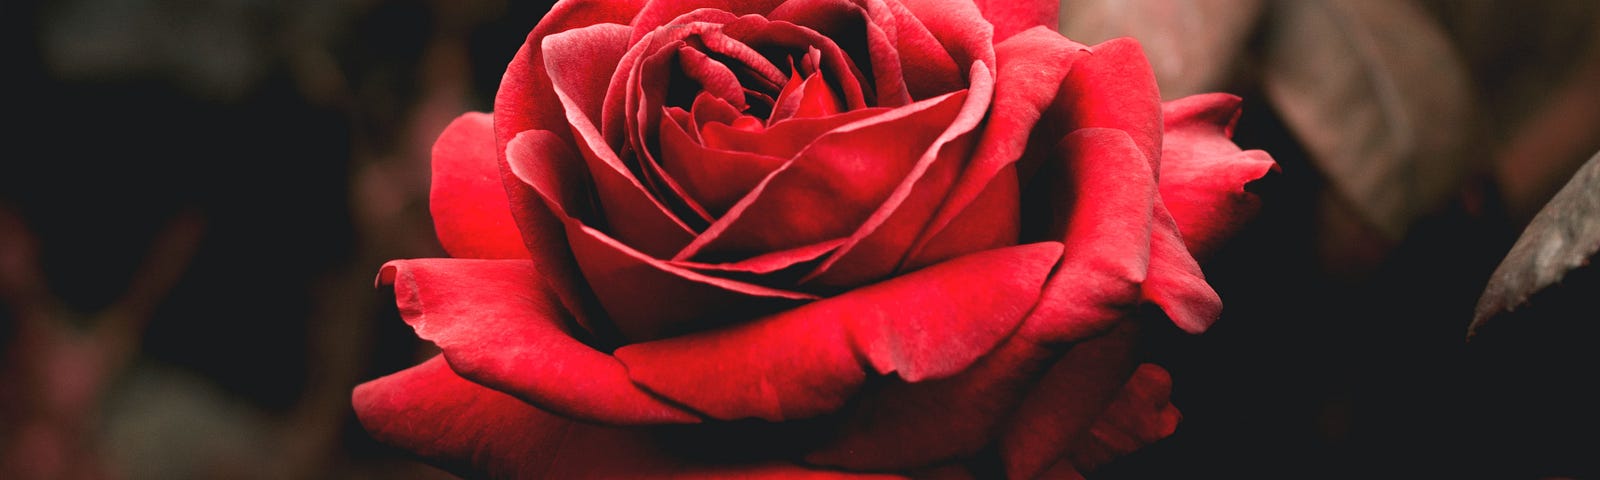 An image of a red rose in bloom.